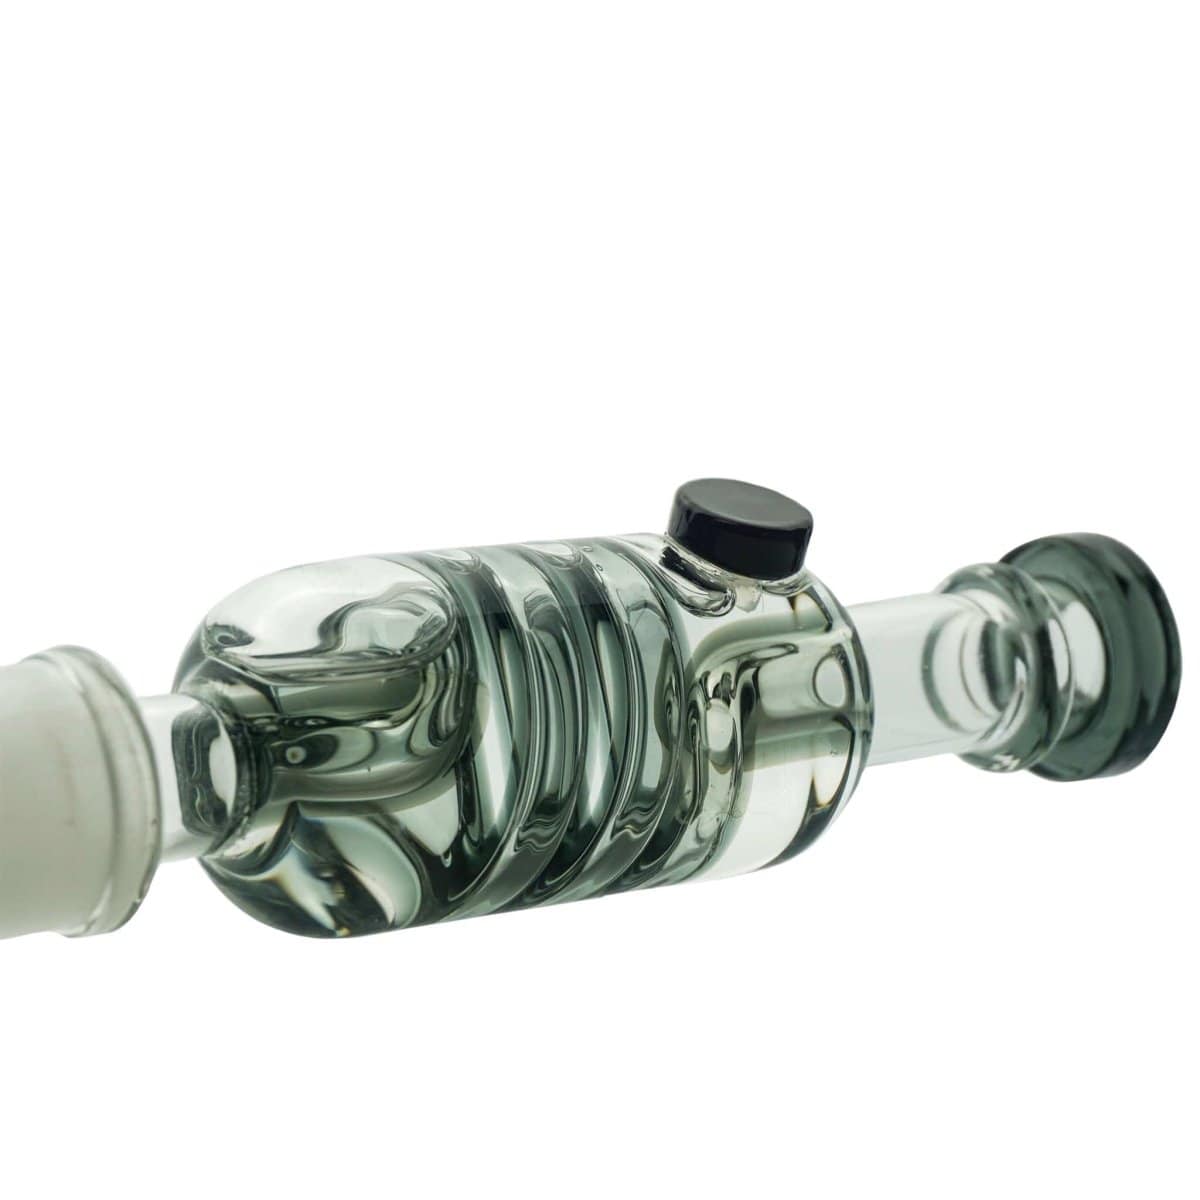 Freeze Pipe Dab Rig Freeze Pipe Nectar Collector Kit